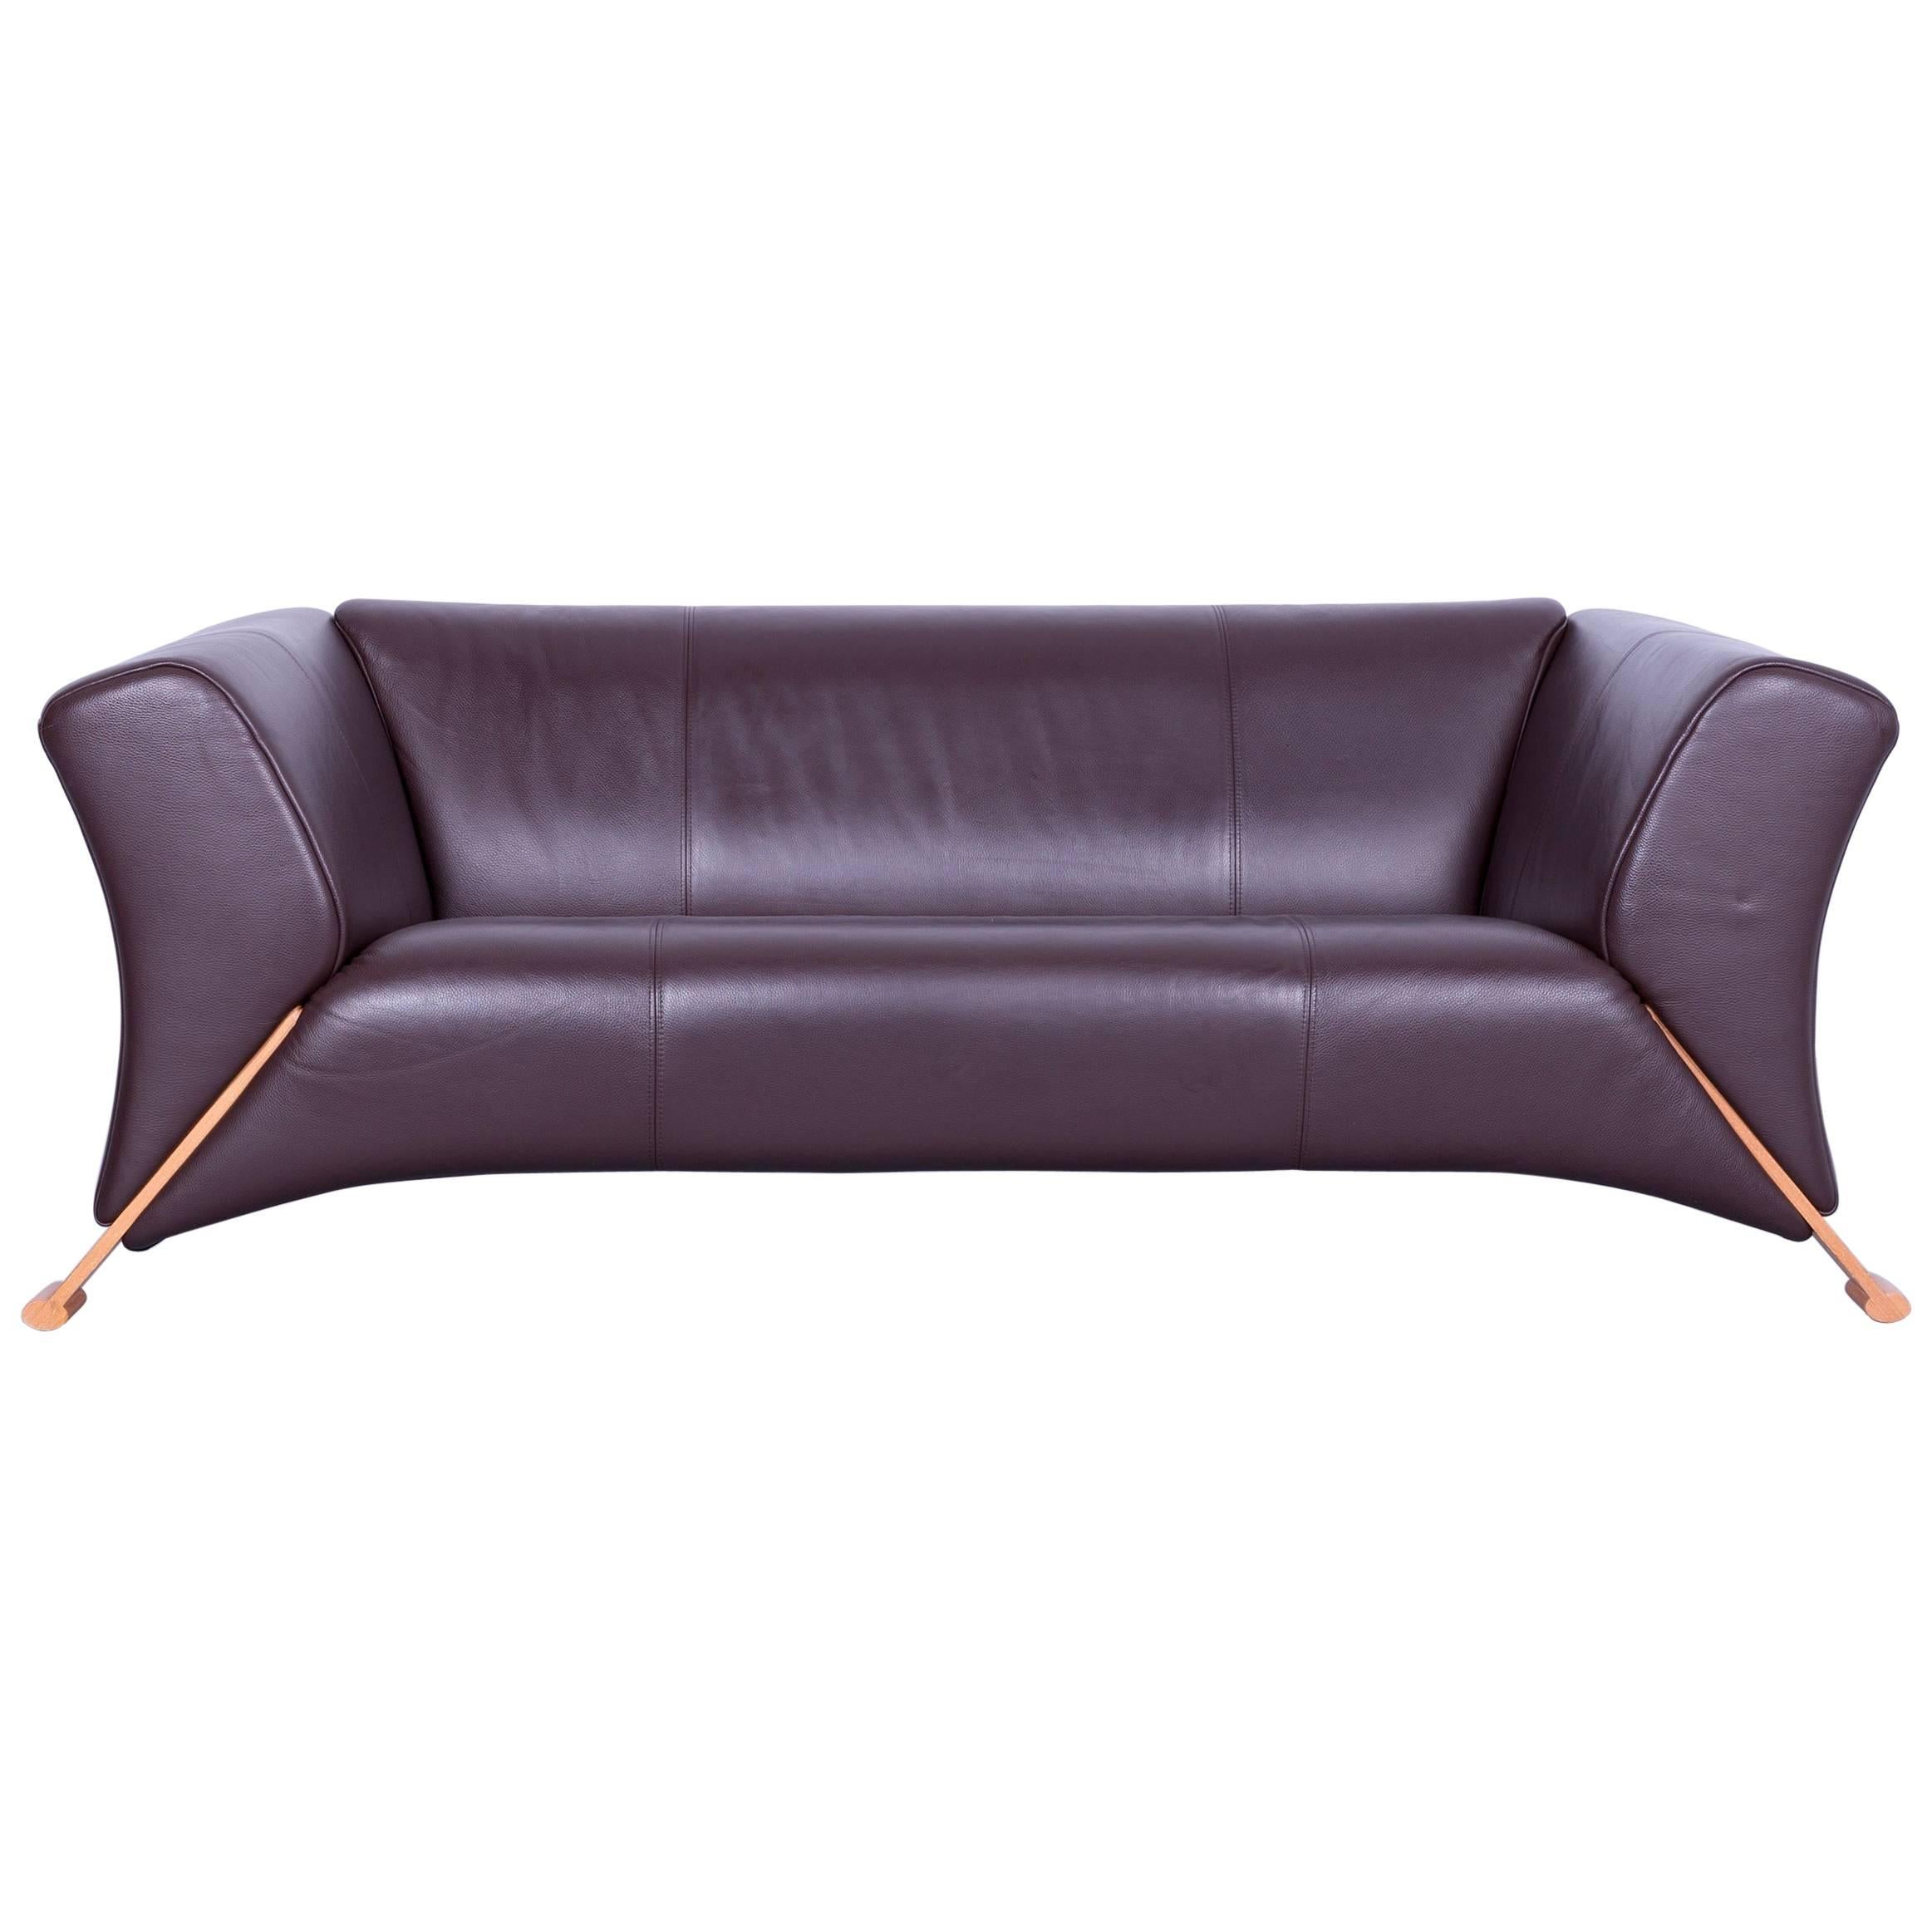 Rolf Benz 322 Designer Sofa Brown Two-Seat Leather Modern Couch Metal Feet